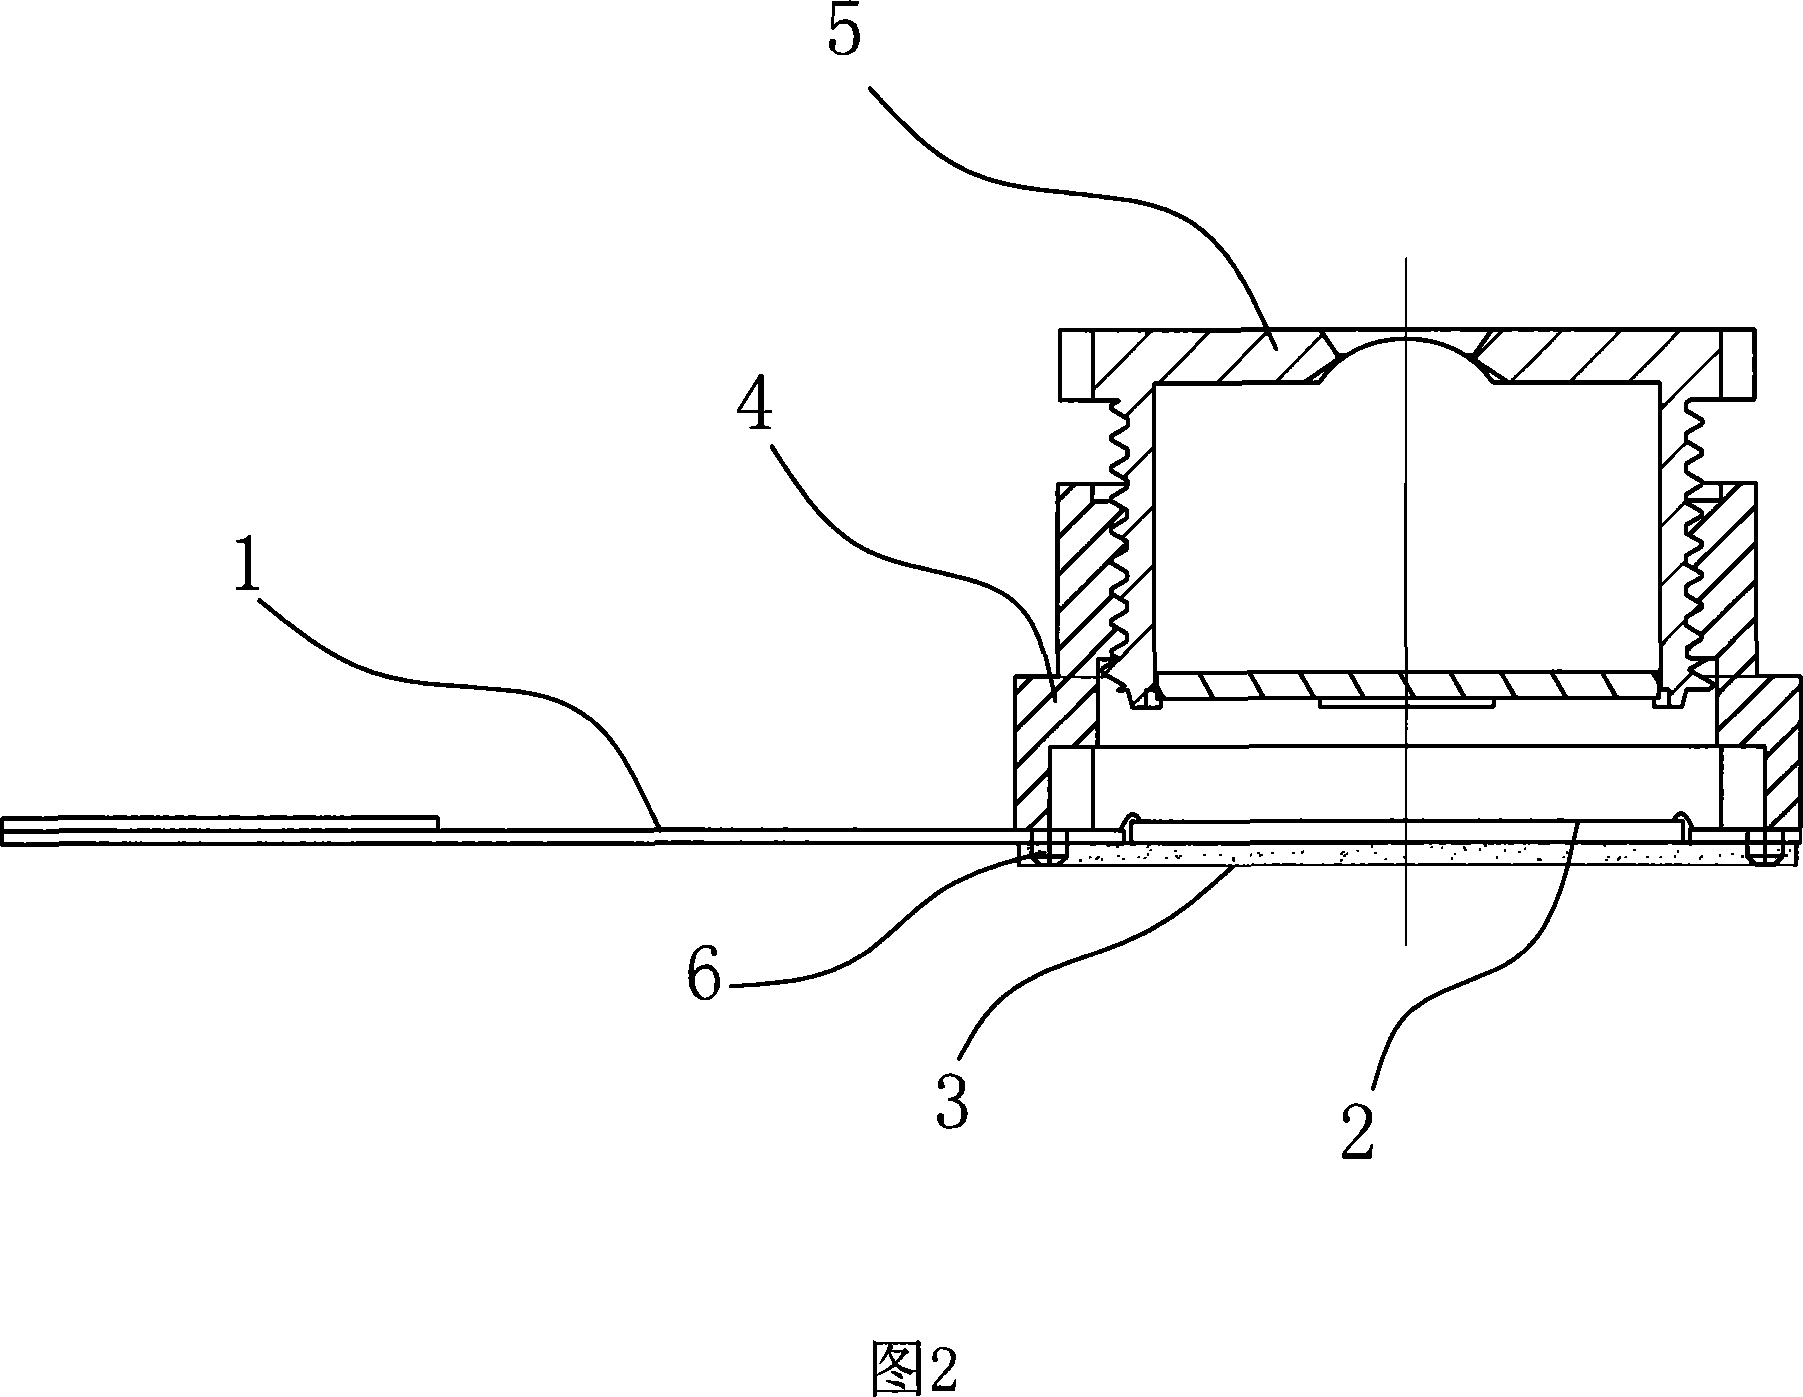 Making method for the image module with the sensor directly connected and encapsulated together with the soft board